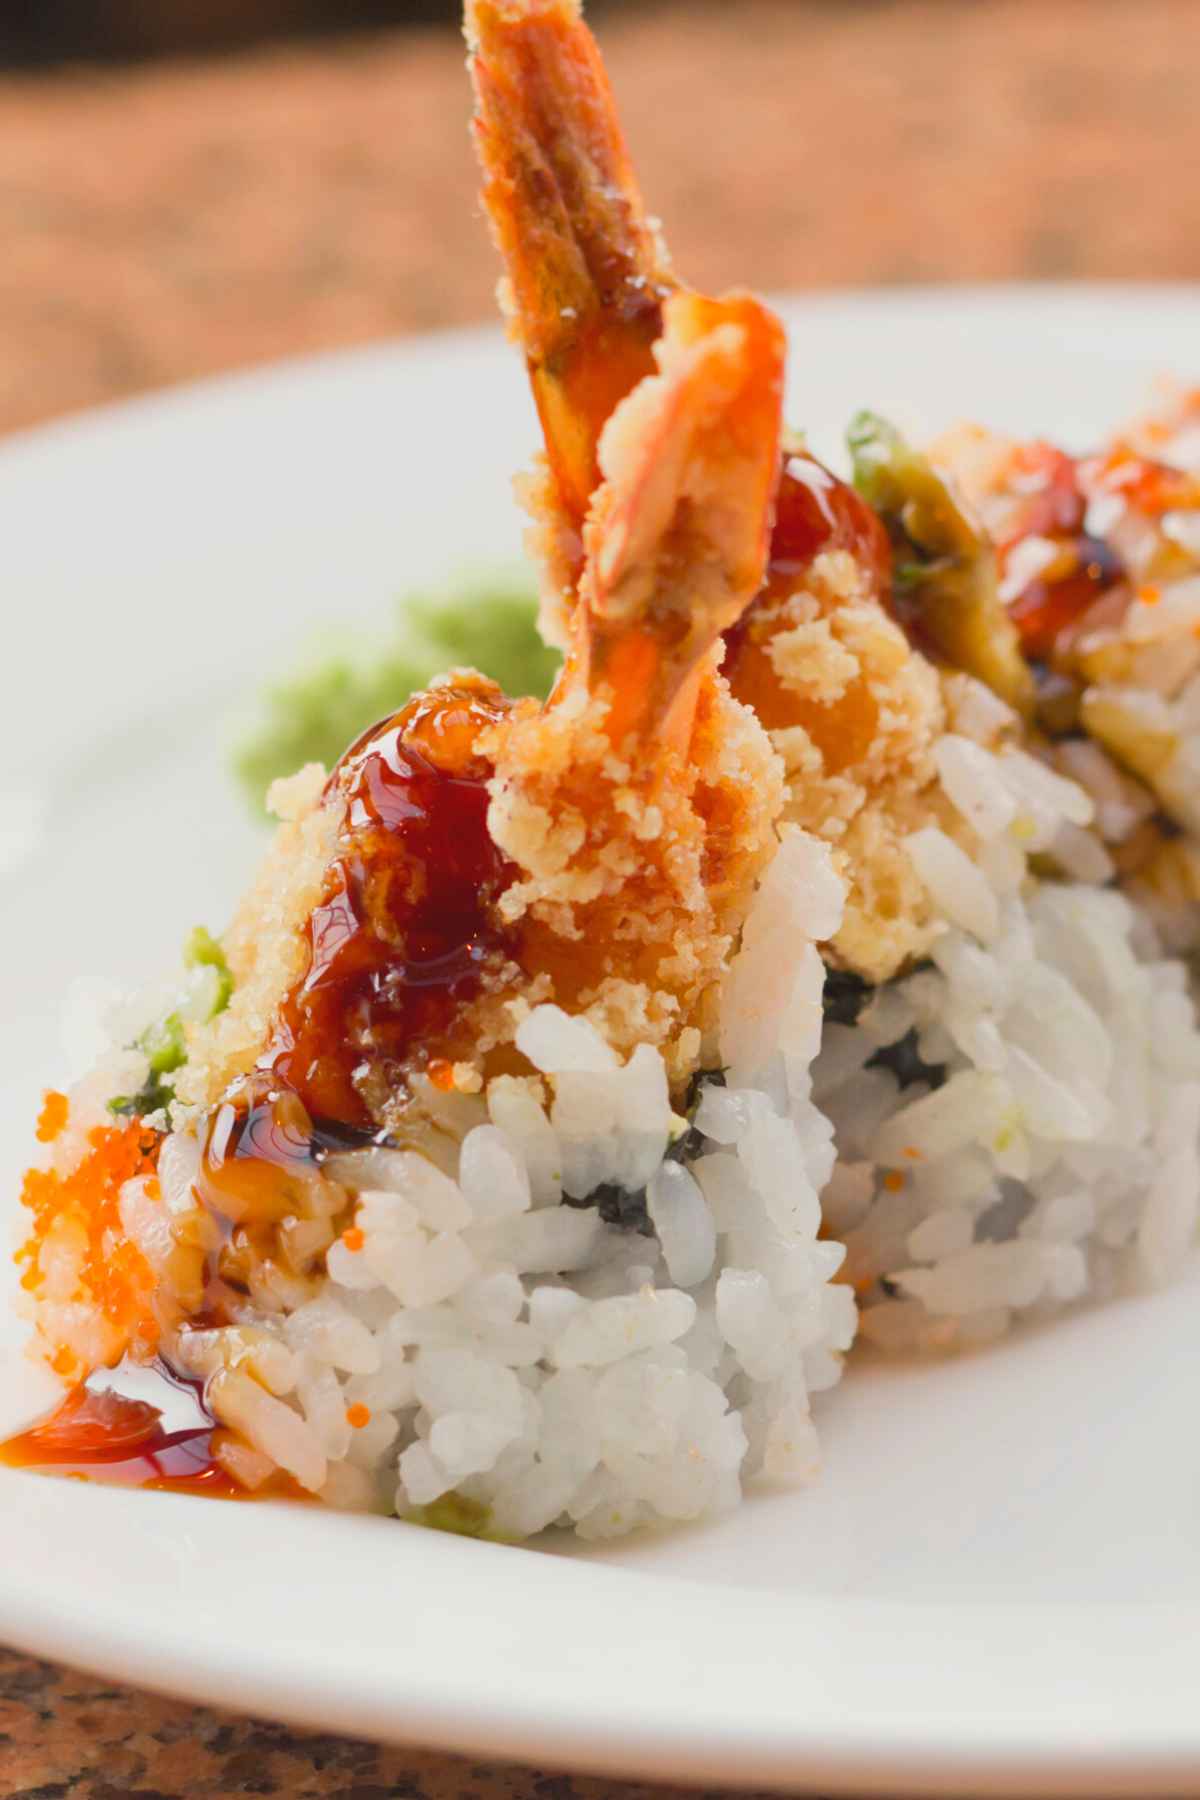 Get ready for an explosion of flavors with this easy-to-make sushi roll! A Dynamite Roll features crispy tempura shrimp, avocado, cucumber, mango and a delicious sauce that simply tantalizes your taste buds. A beautiful combination of sweet and savory flavors, we highly recommend serving this roll as a dinner party appetizer. However, we also understand if you decide to keep this delicious secret to yourself.